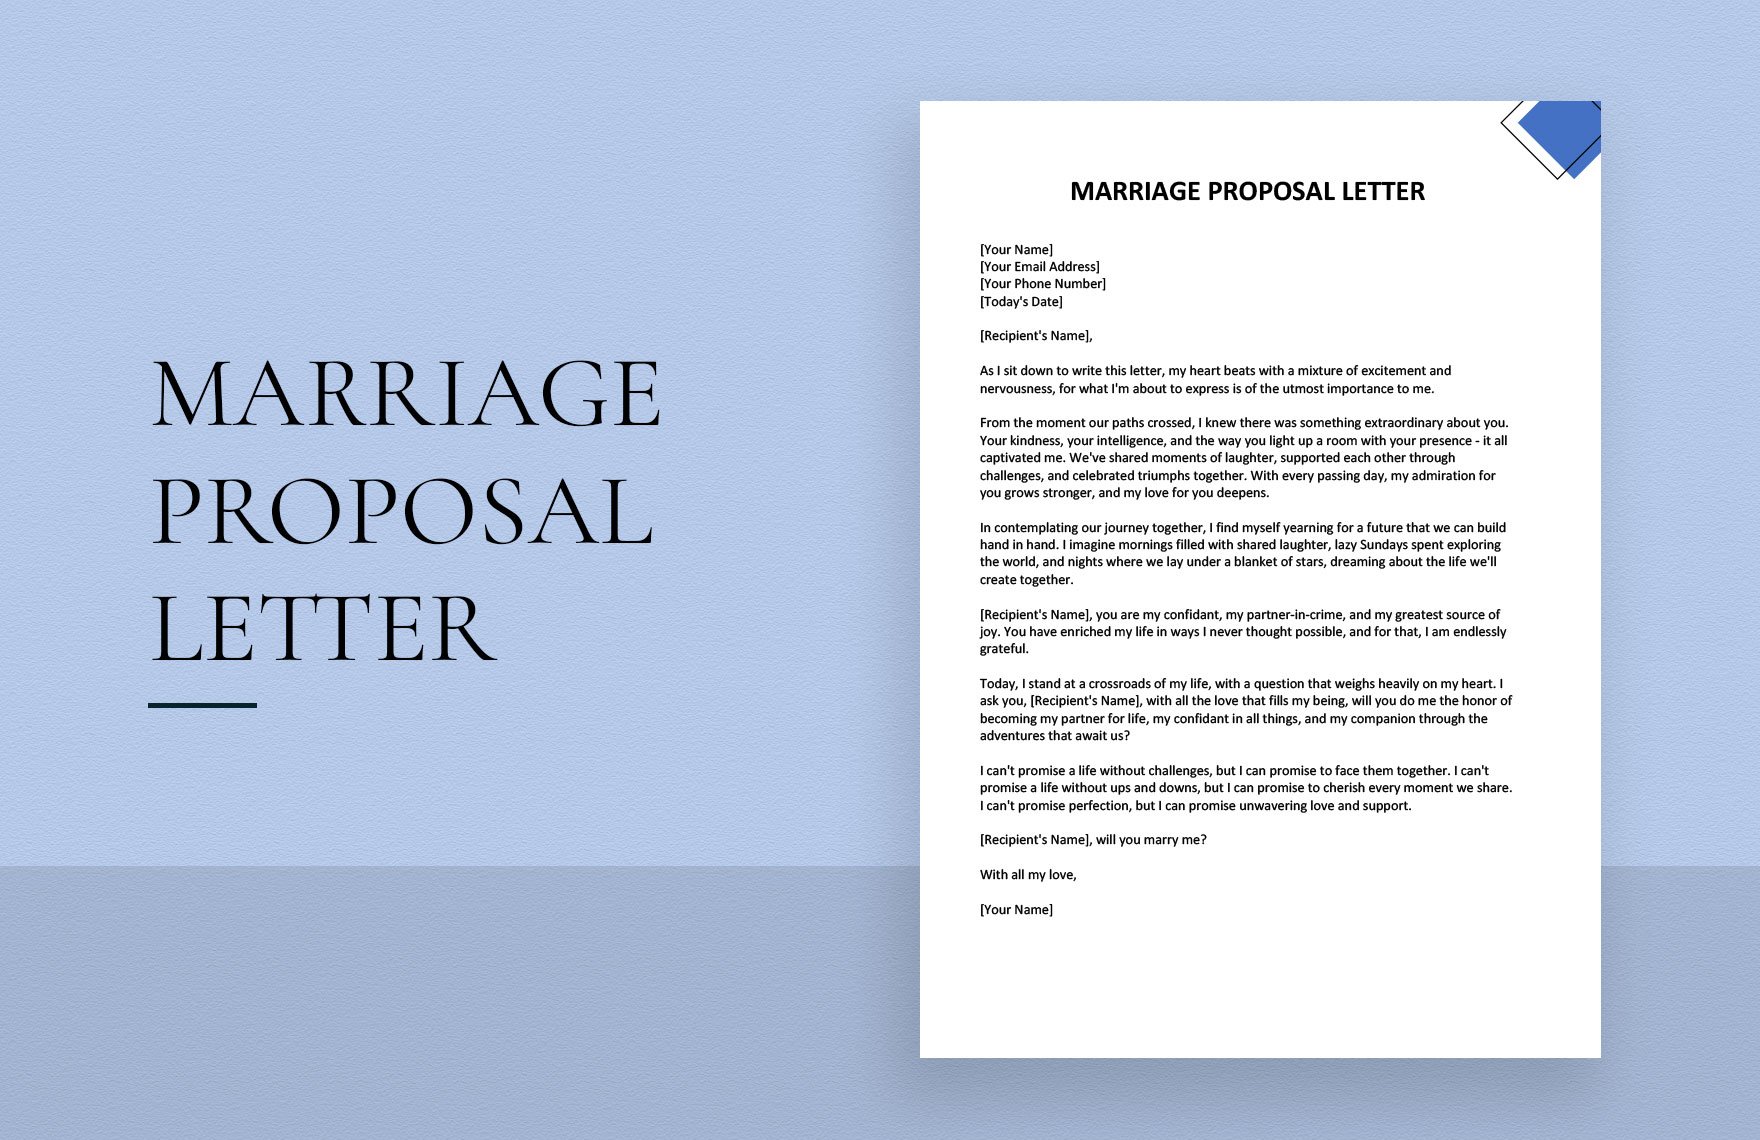 Marriage Proposal Letter in Word, Google Docs